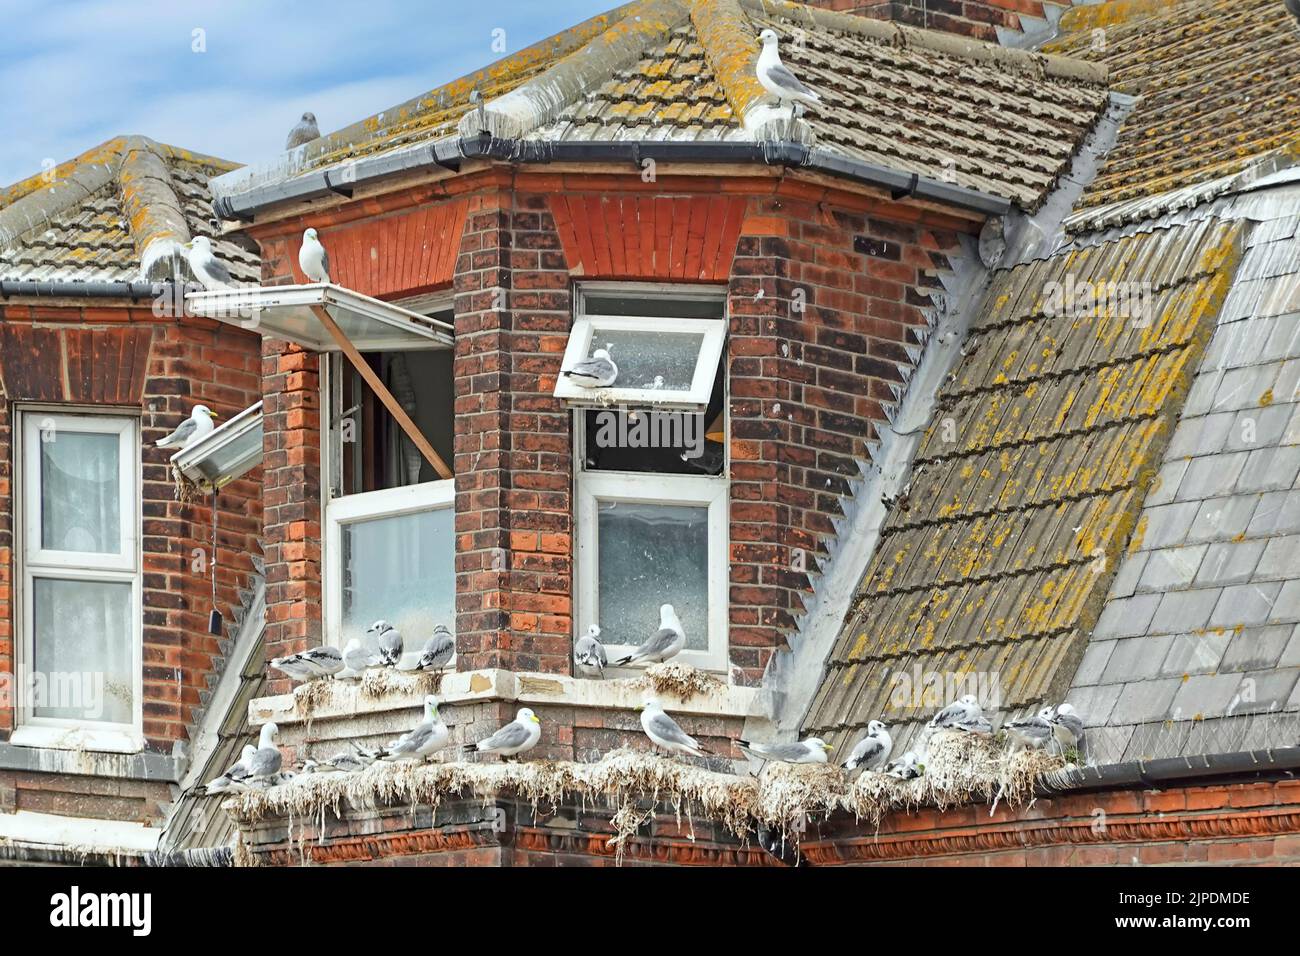 Close up of neglected roof level bay window coastal property contaminated by seagulls roosting on gutters & window ledges Lowestoft Suffolk England UK Stock Photo